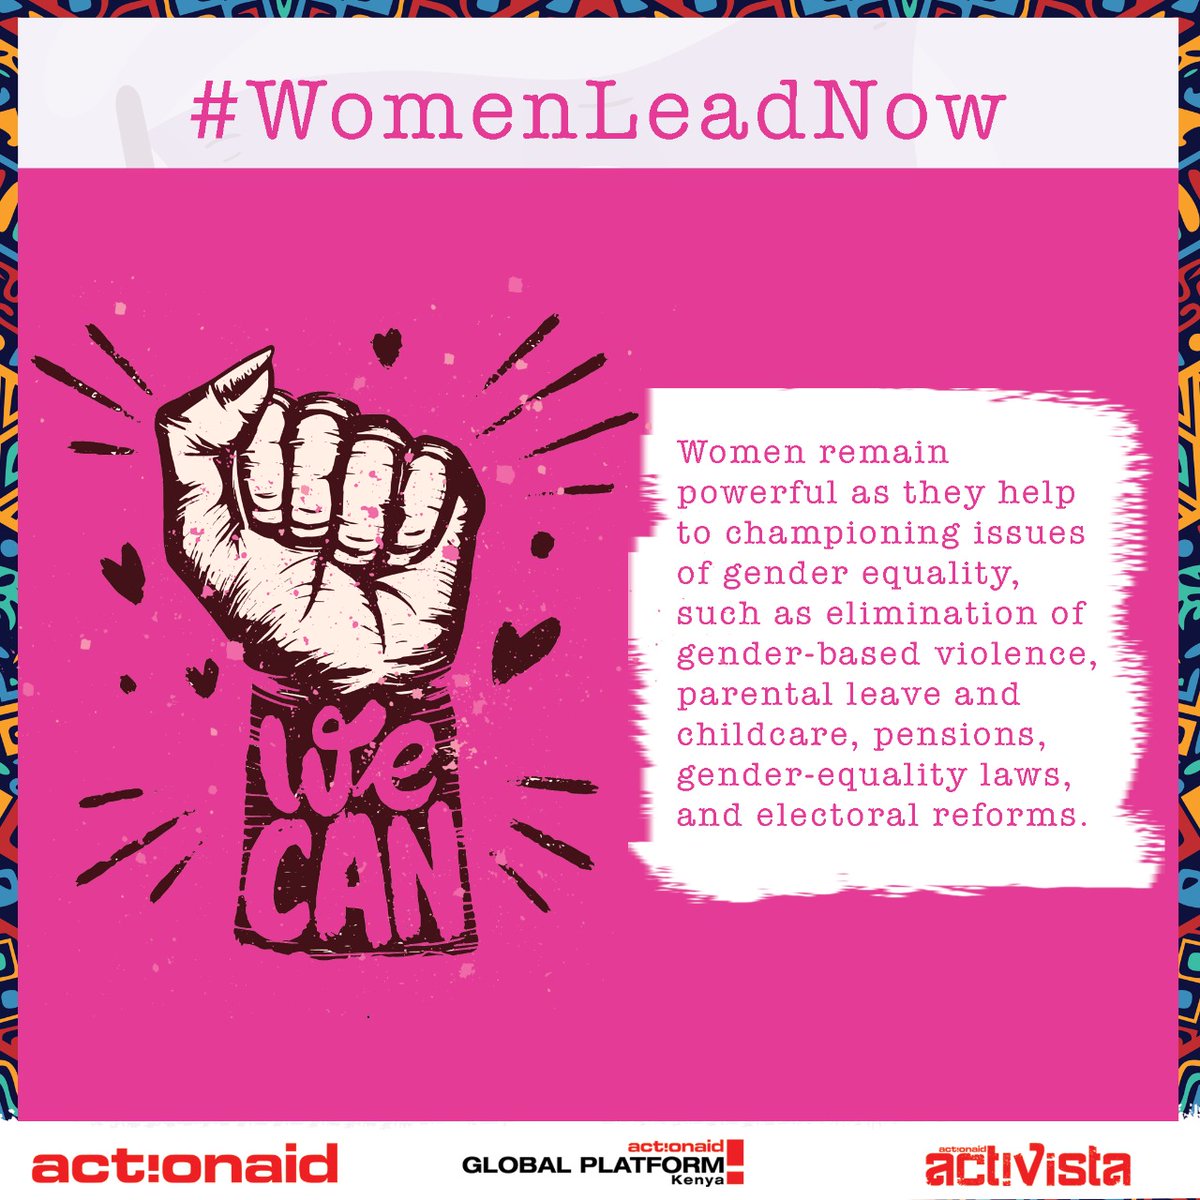 Gender equality in the political ground should be greatly upheld. Representation of women should be at its peak. #WomenLeadNow